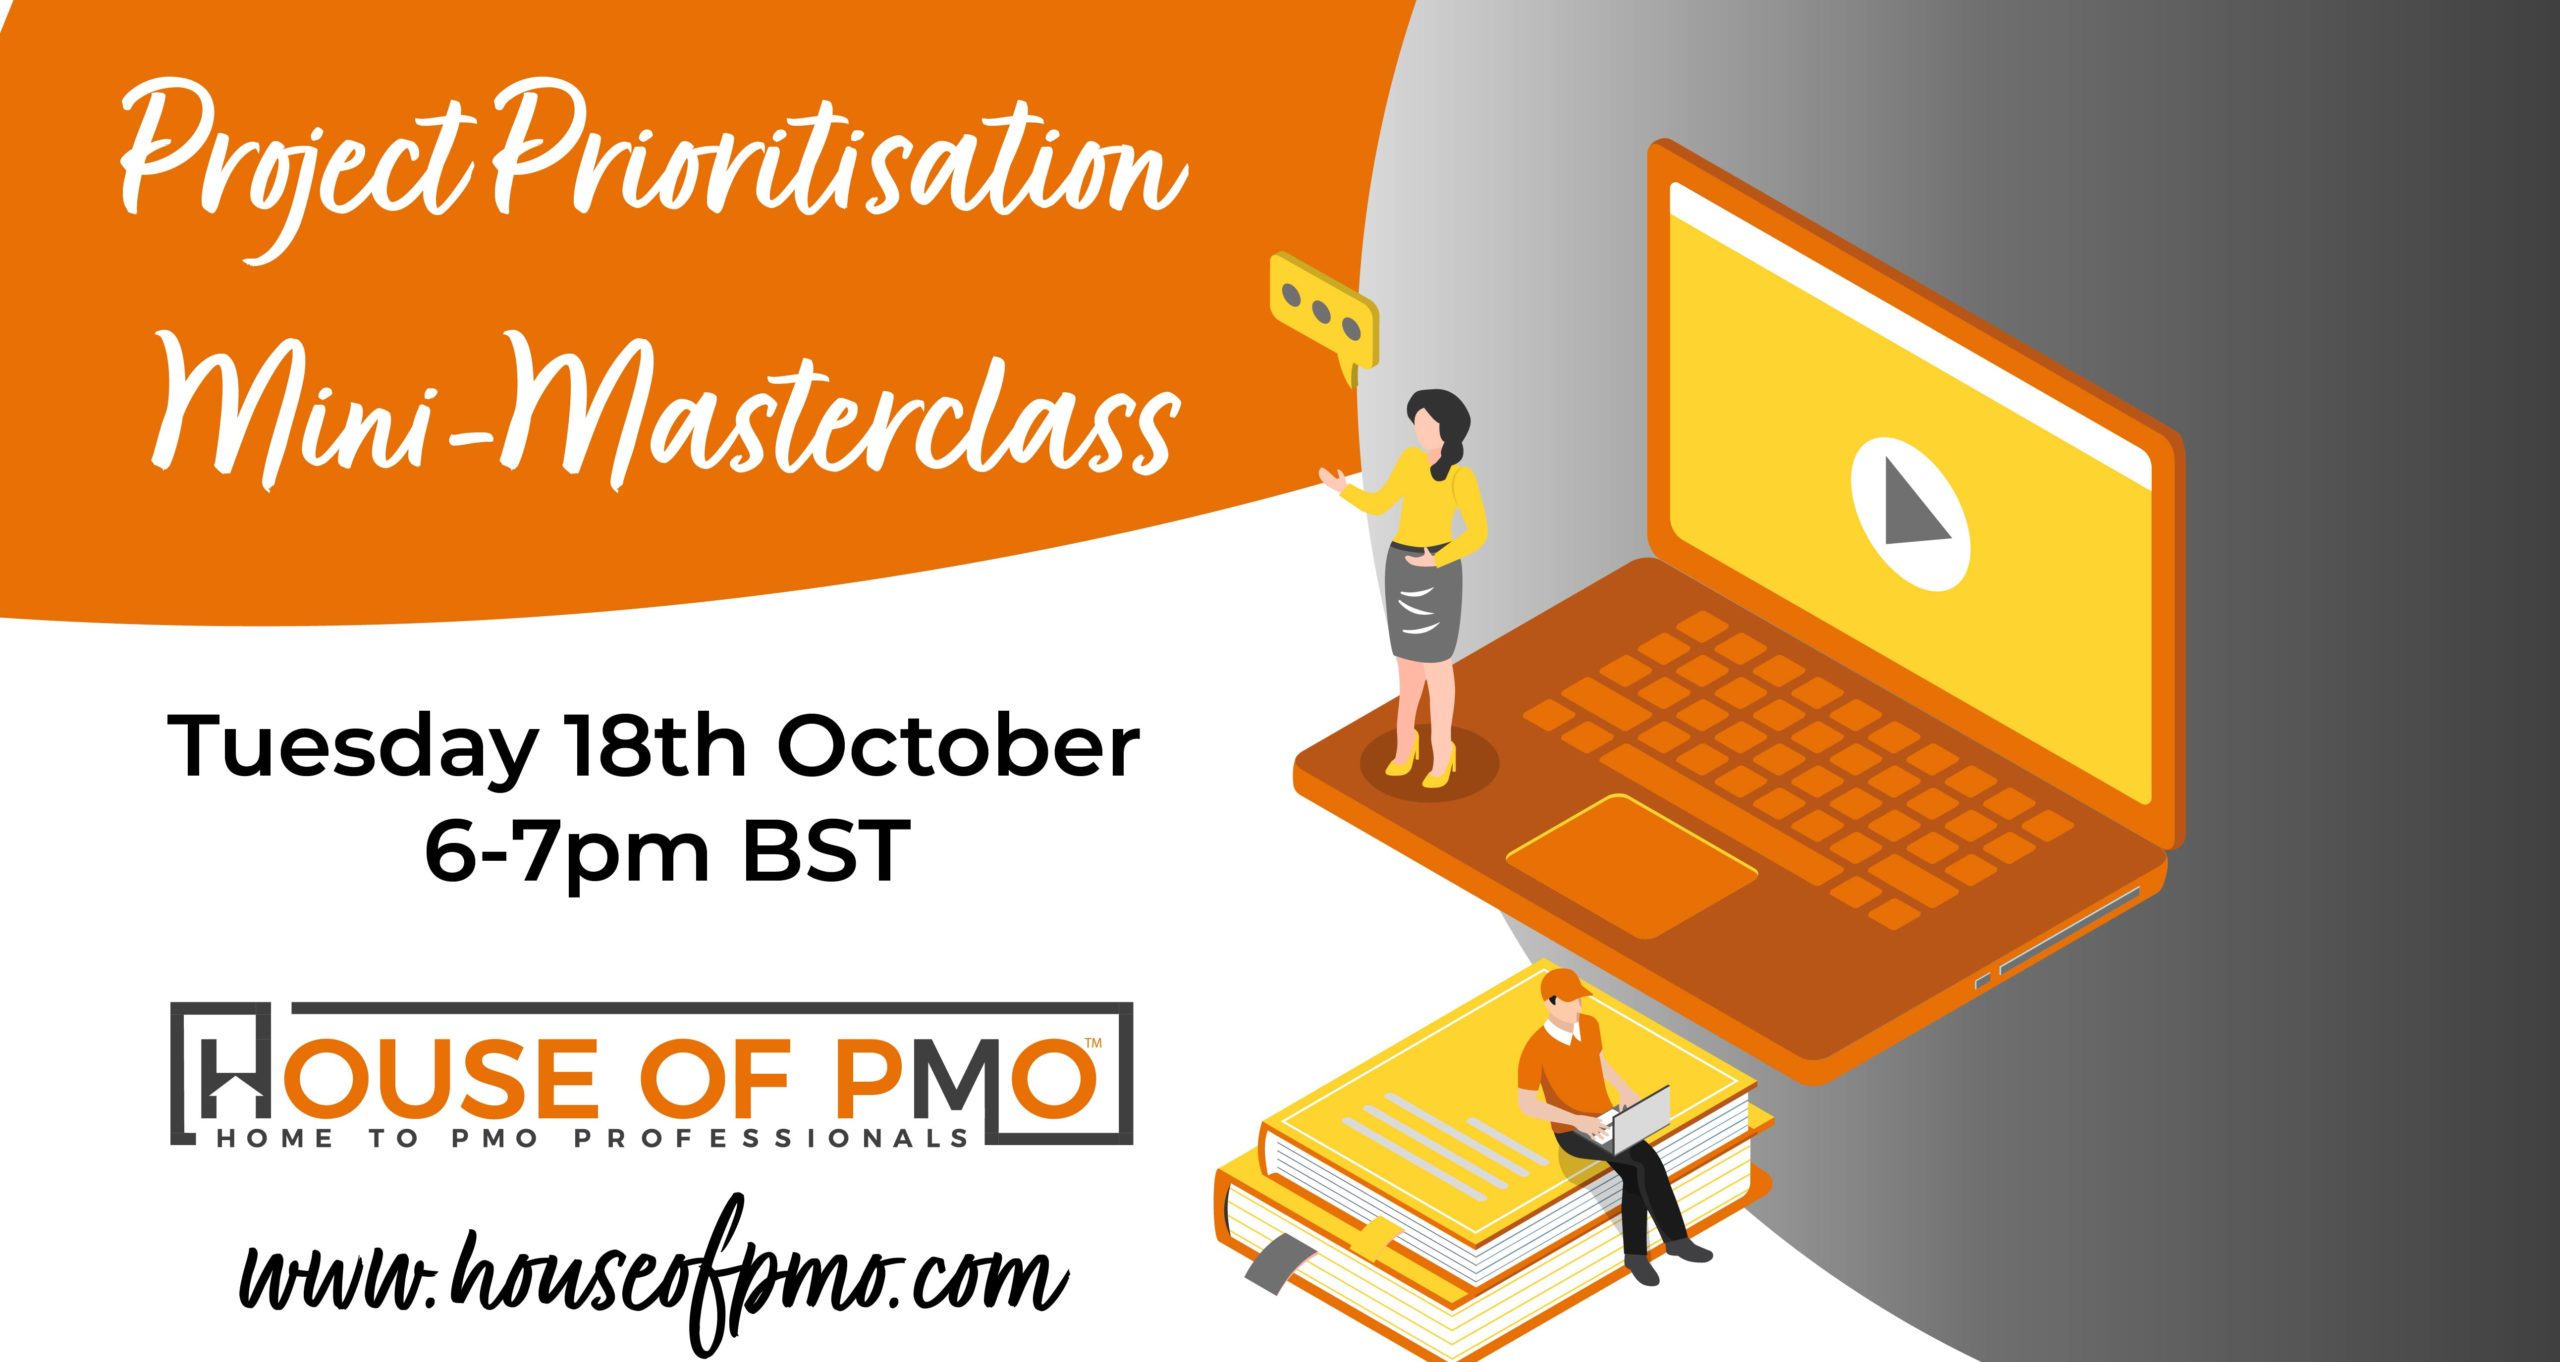 cartoon of a woman stood on top of a laptop and a man sat on top of a book. It is to advertise the house of PMO event Project Prioritisation Mini-Masterclass which is on the 18th of October, 6pm - 7pm